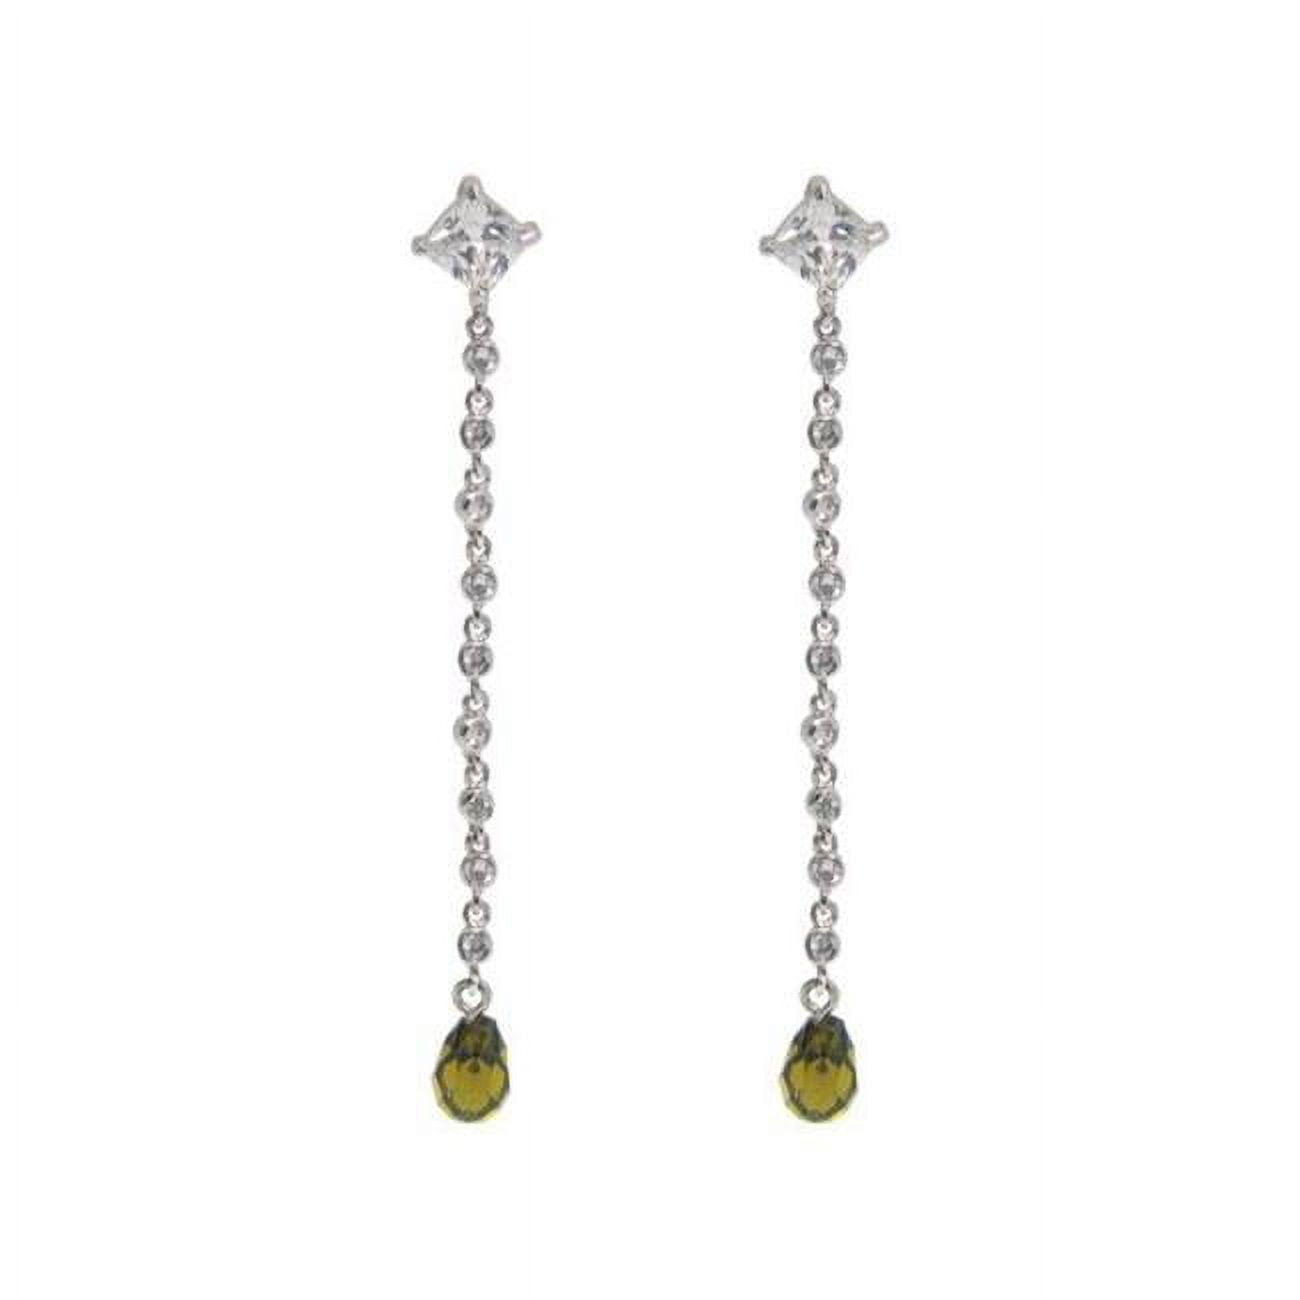 Picture of Fronay 715101 SoCal Green Cubic Zirconia Briolette Earrings in Silver Sterling